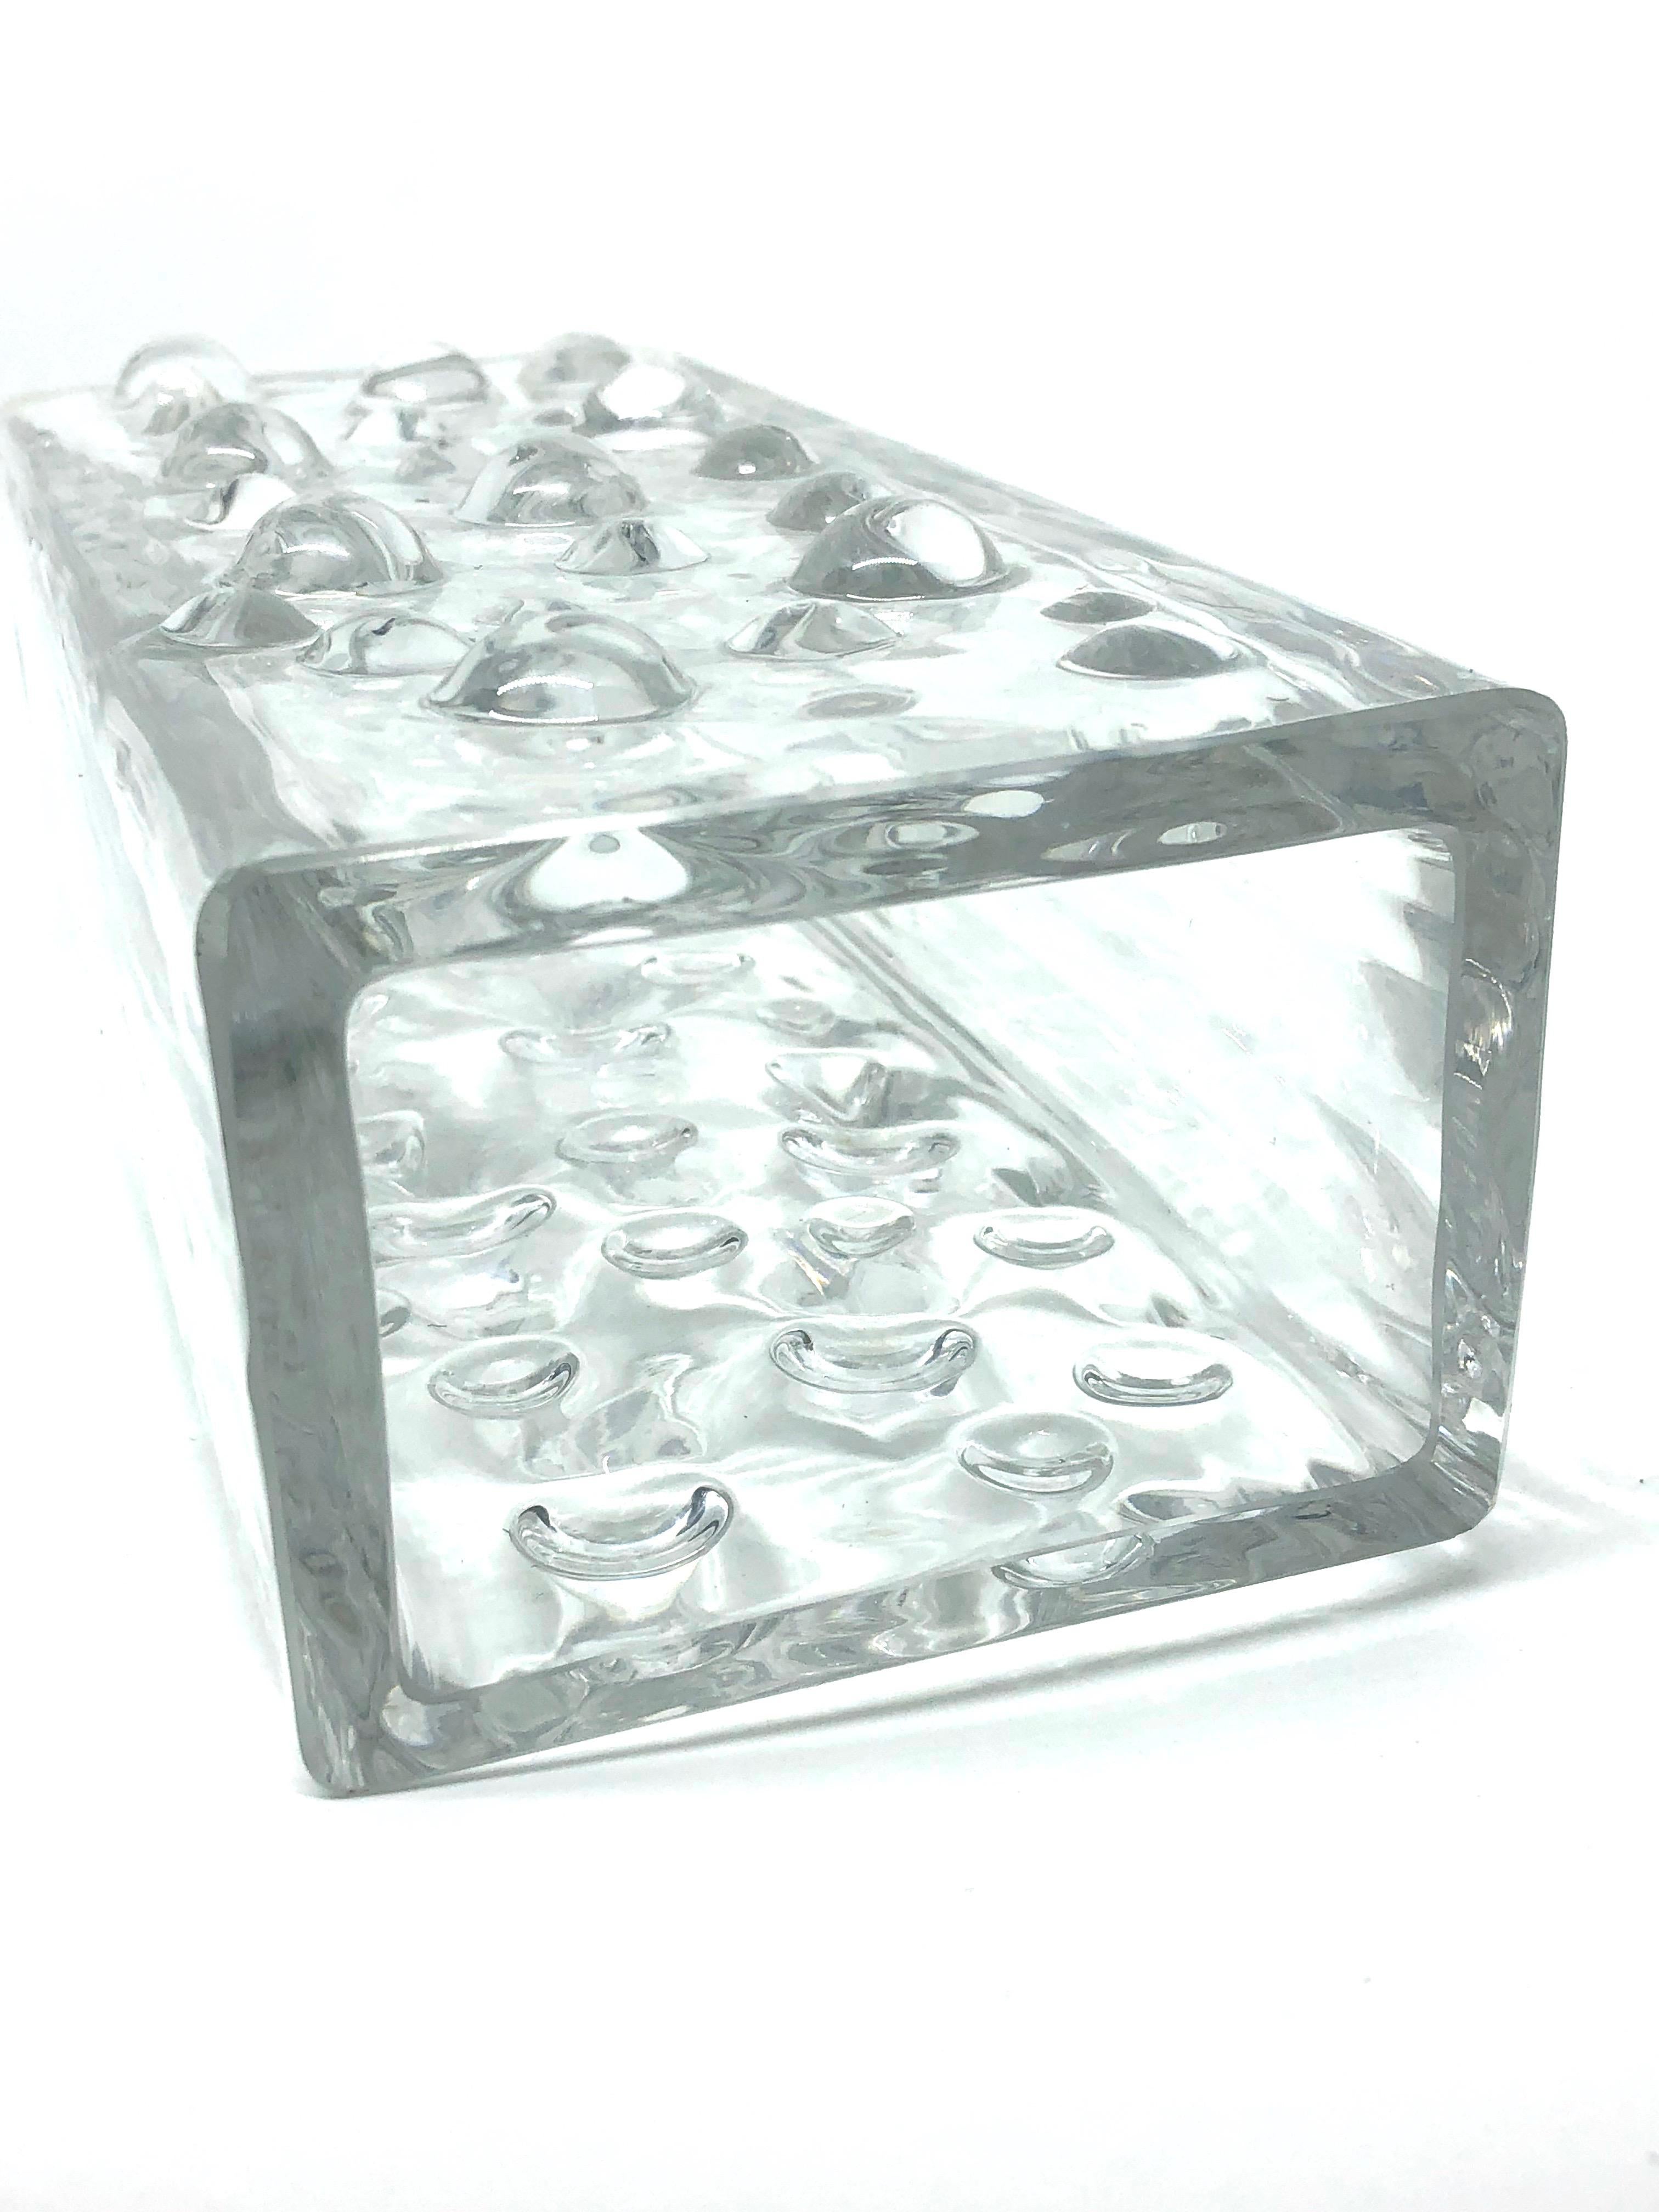 Mid-Century Modern Rectangular Bubble Glass Vase by WMF Glas in Clear Color, circa 1970s For Sale